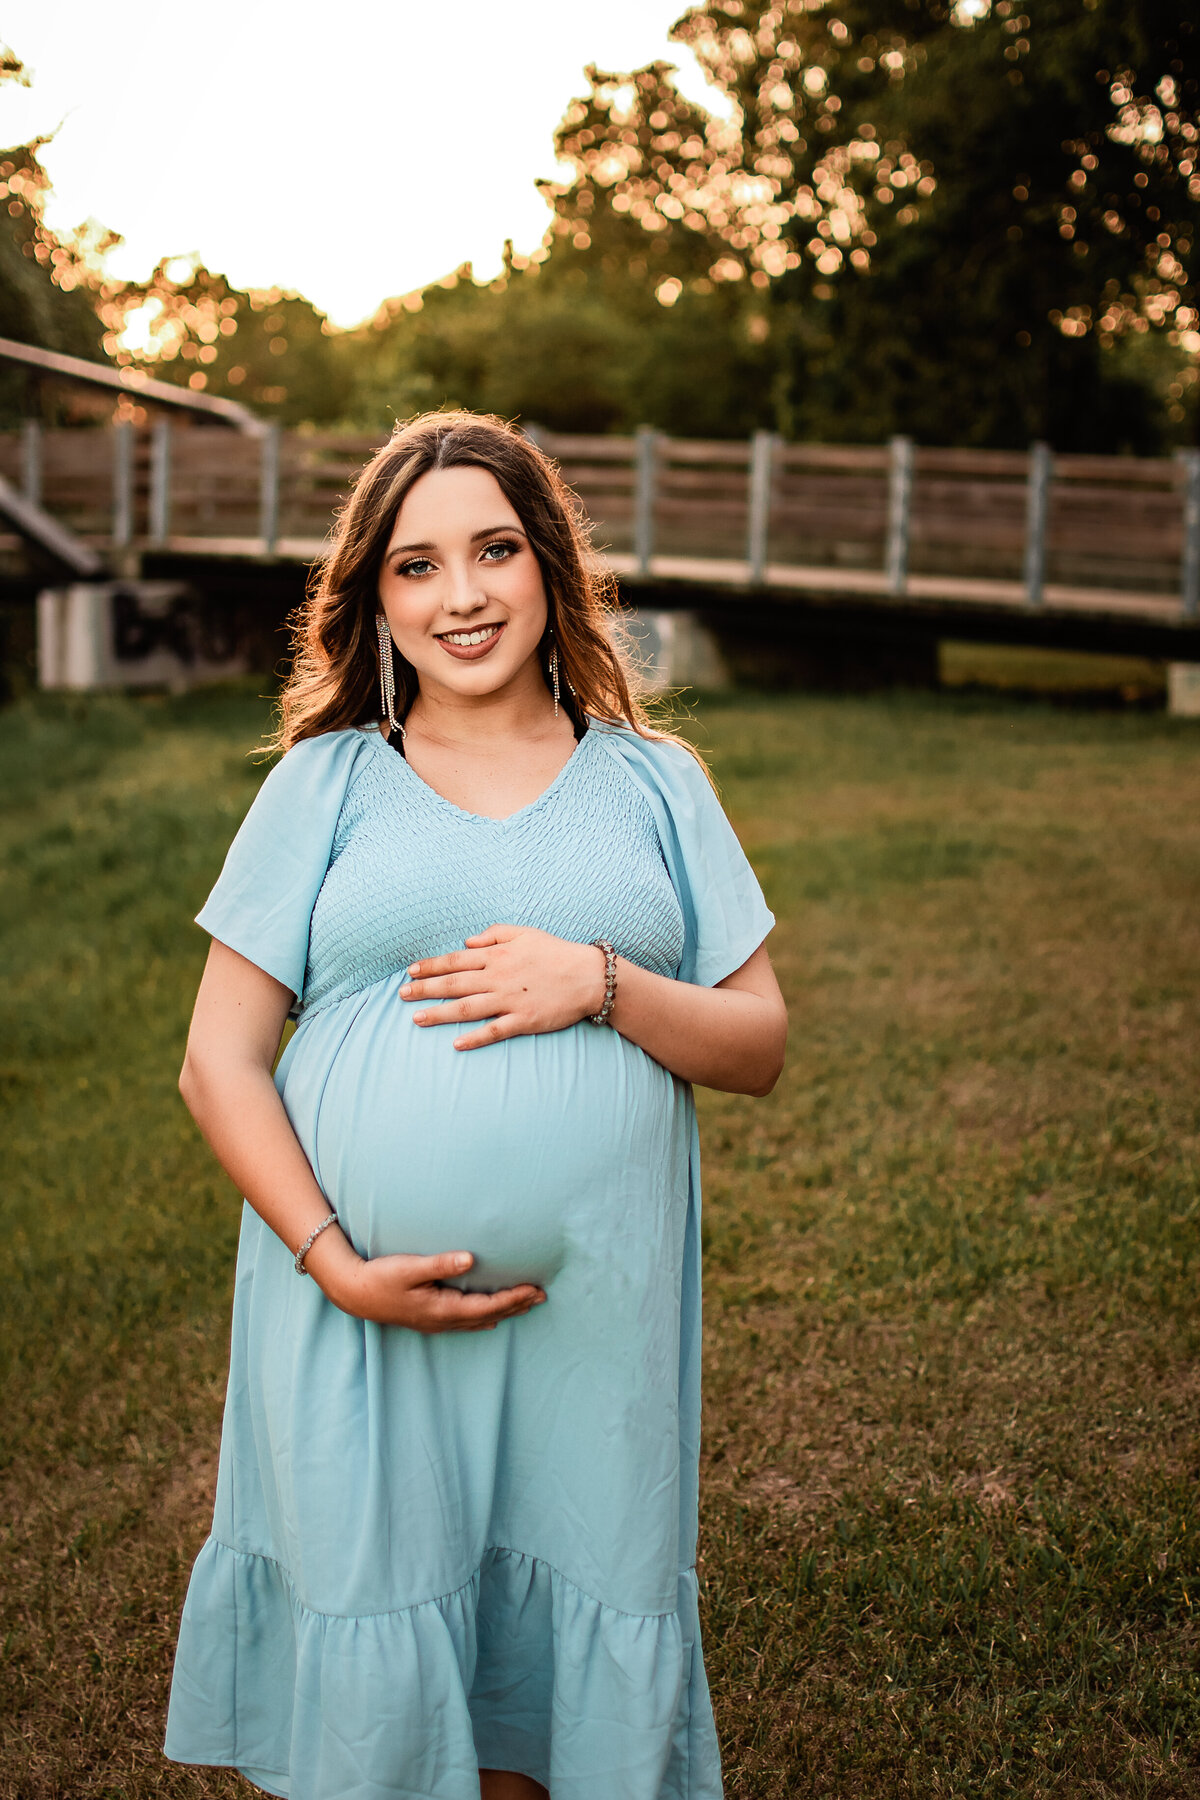 A mom to be wearing a blue dress holds her bump and smiles art the camera.